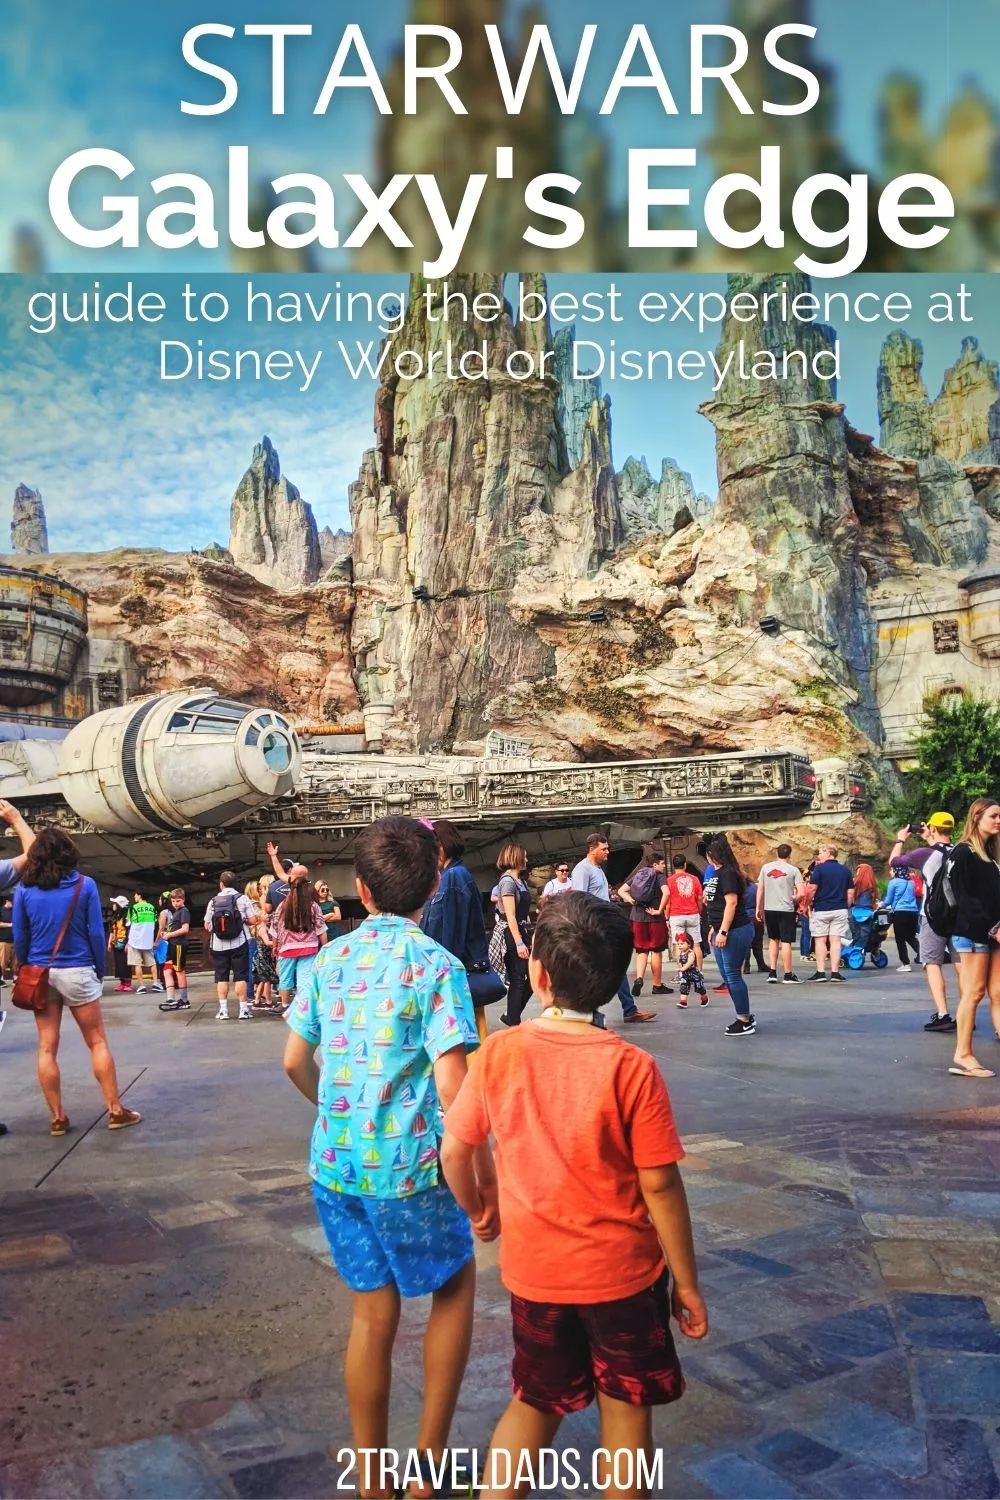 Star Wars: Galaxy's Edge is an incredible experience with so many things to do and see. Both Disney World and Disneyland have this awesome Star Wars land. This guide to Galaxy's Edge is ideal for having a great visit to galactic village of Batuu.